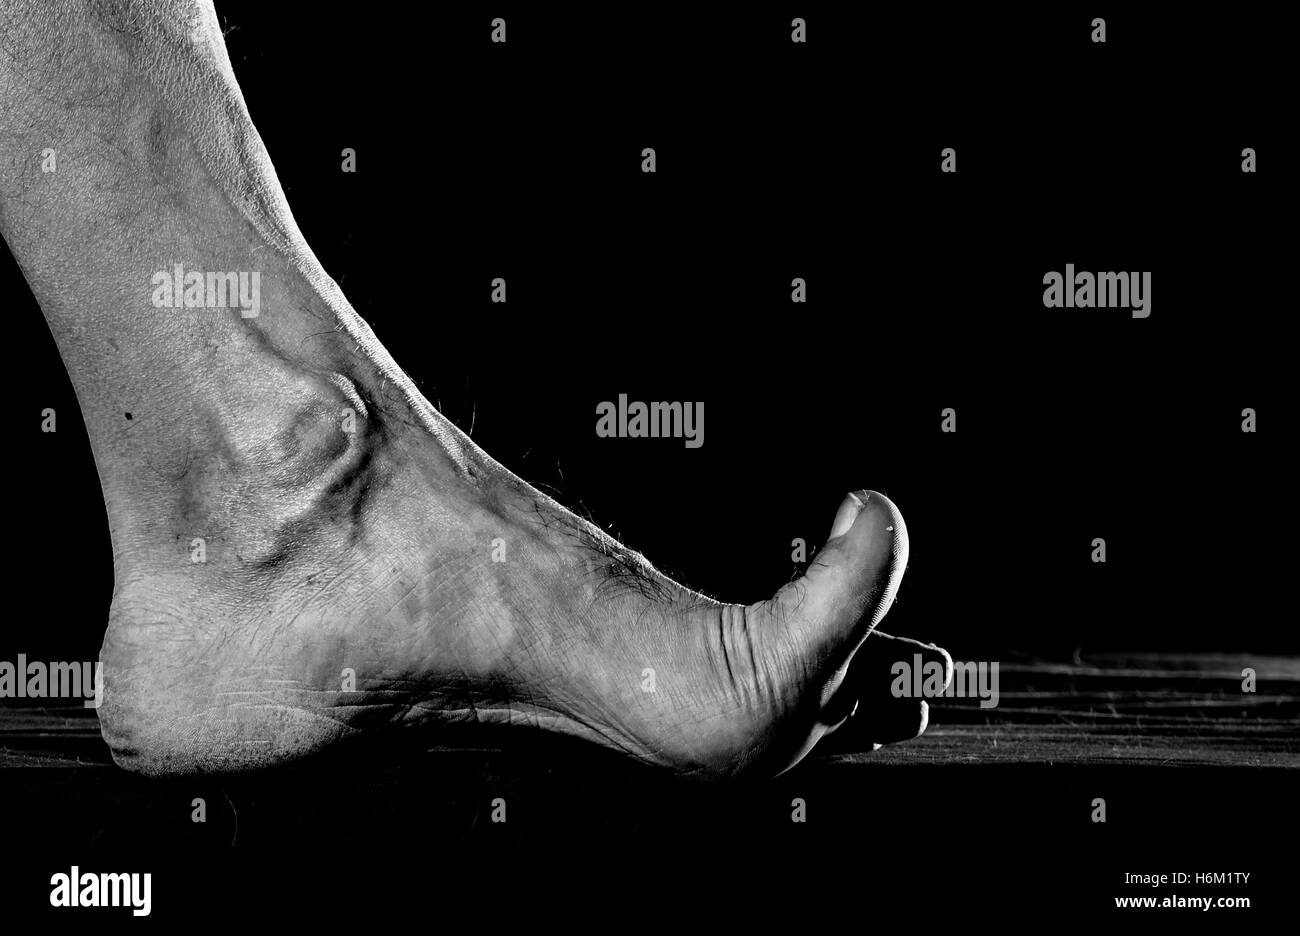 Dirty foot barefooted men against a dark background. Stock Photo